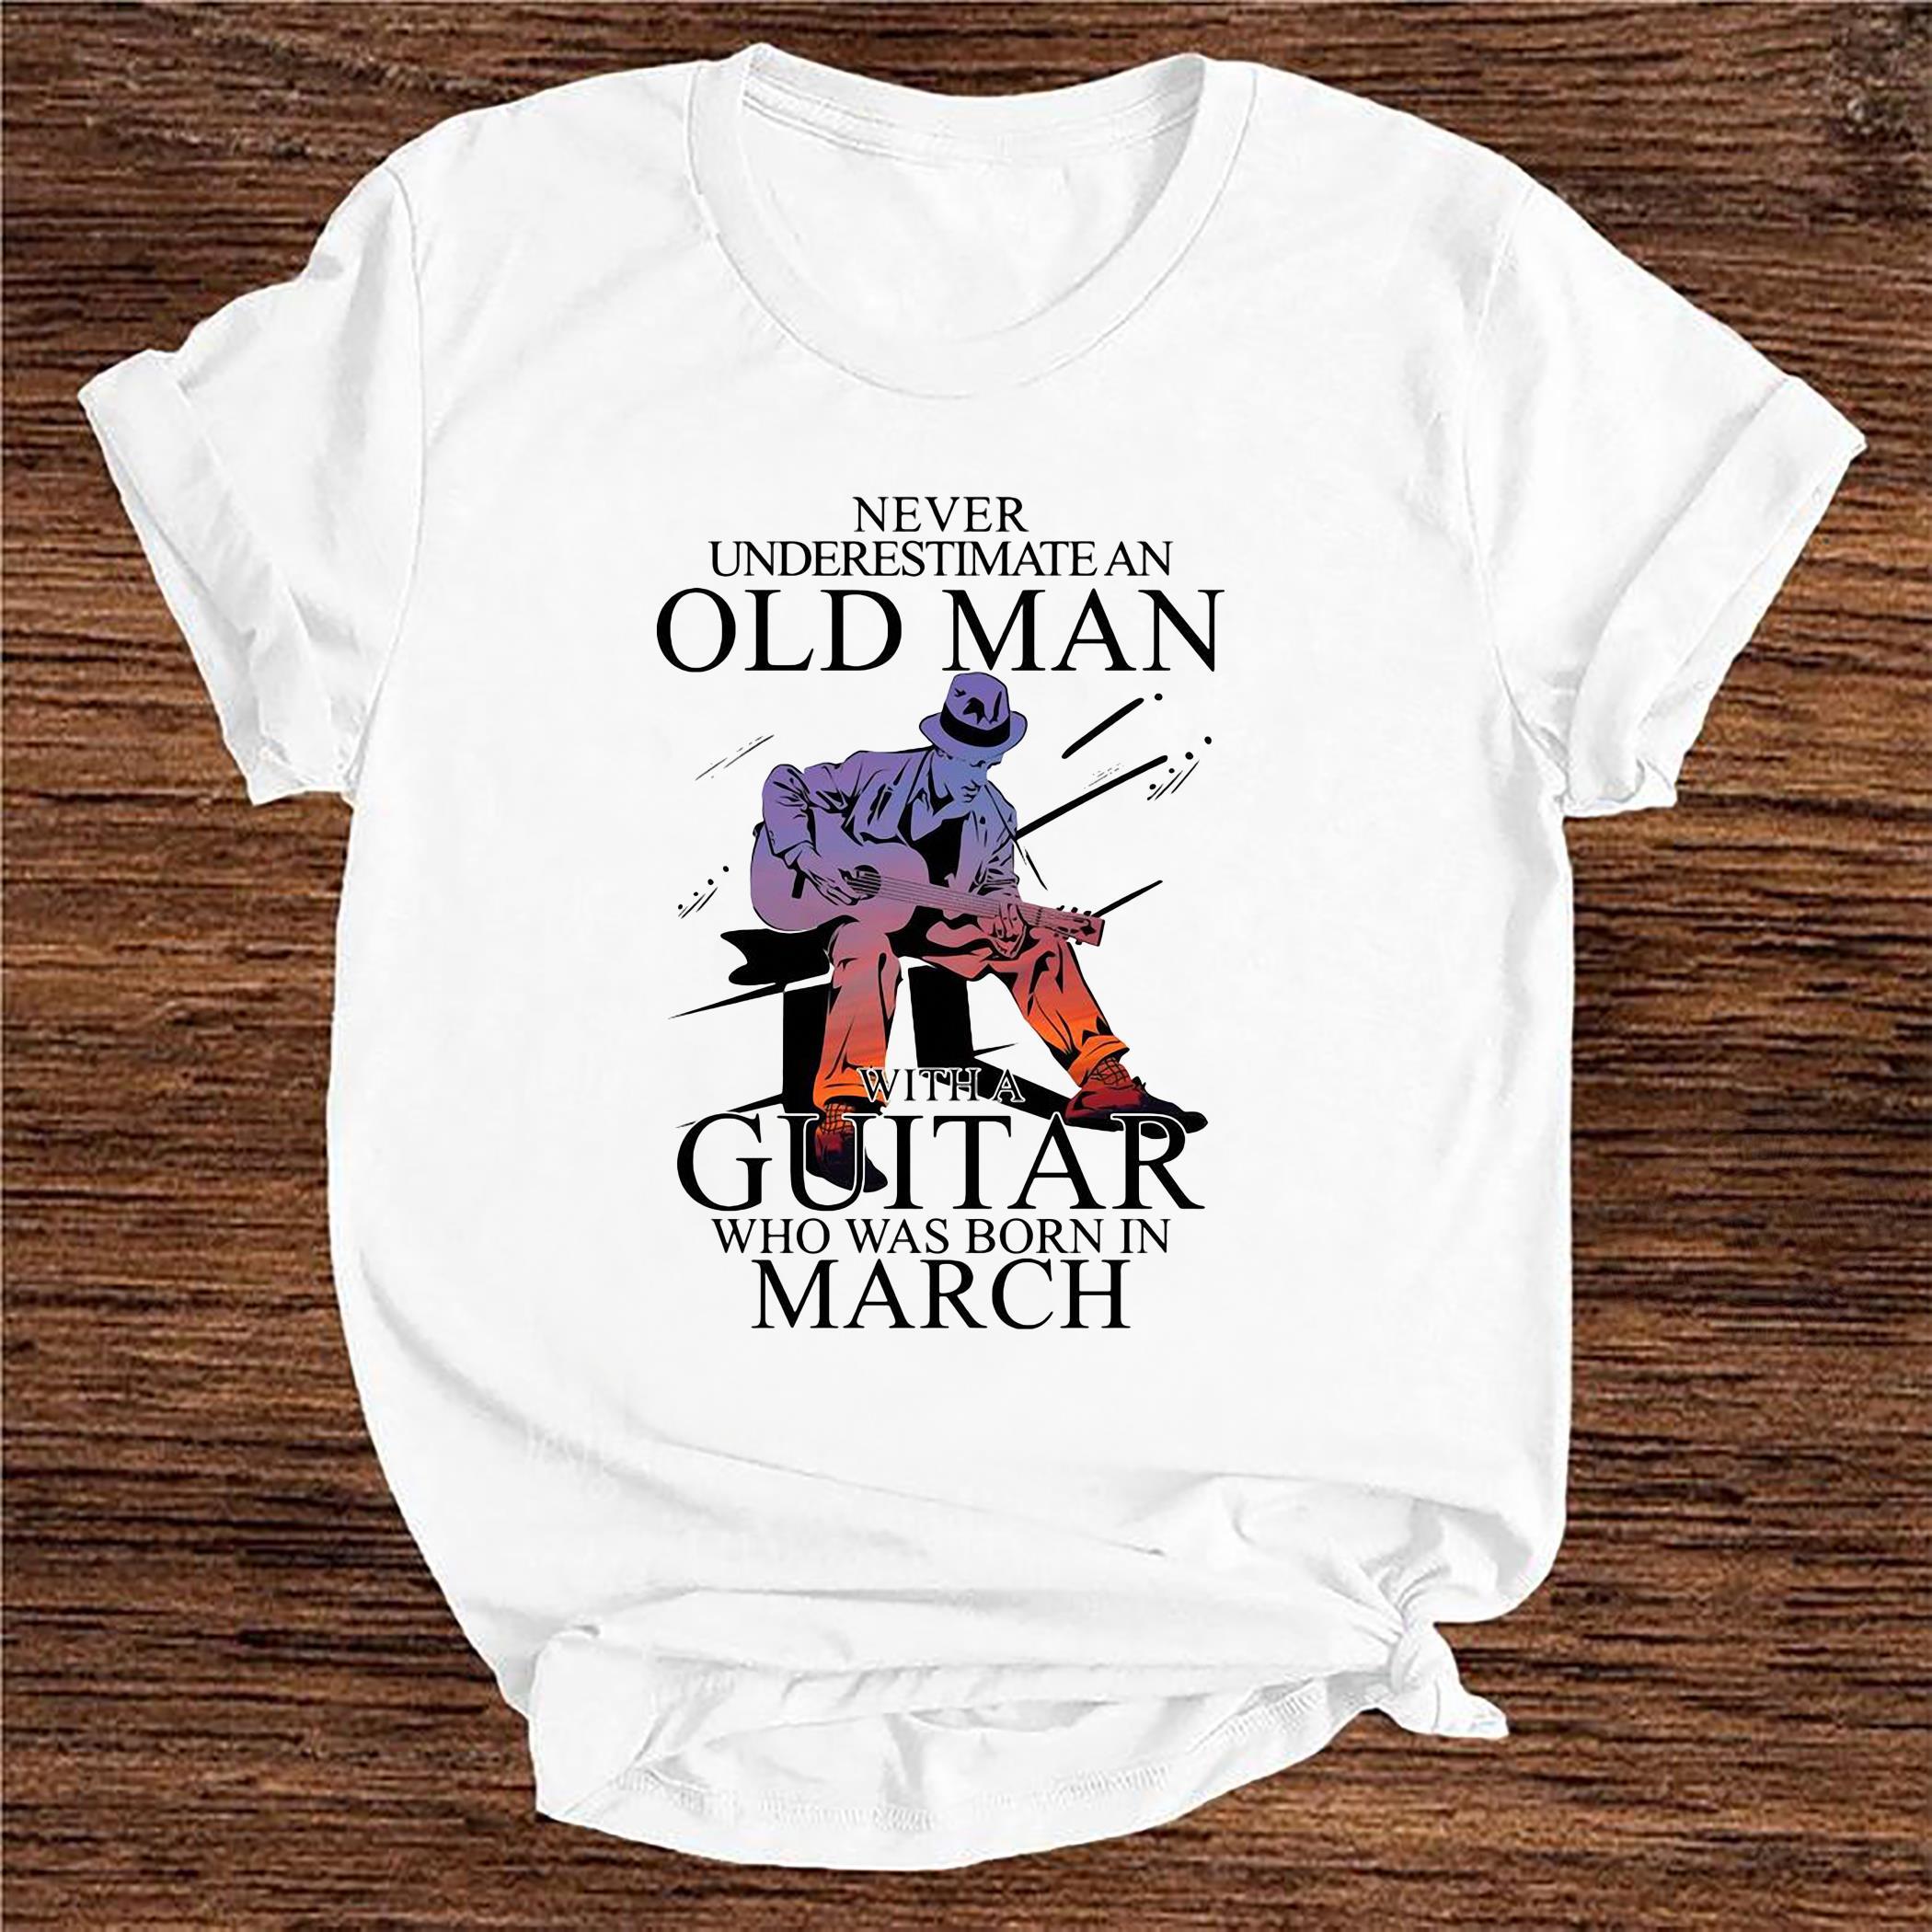 Never underestimate old man with a guitar who was born in march shirt